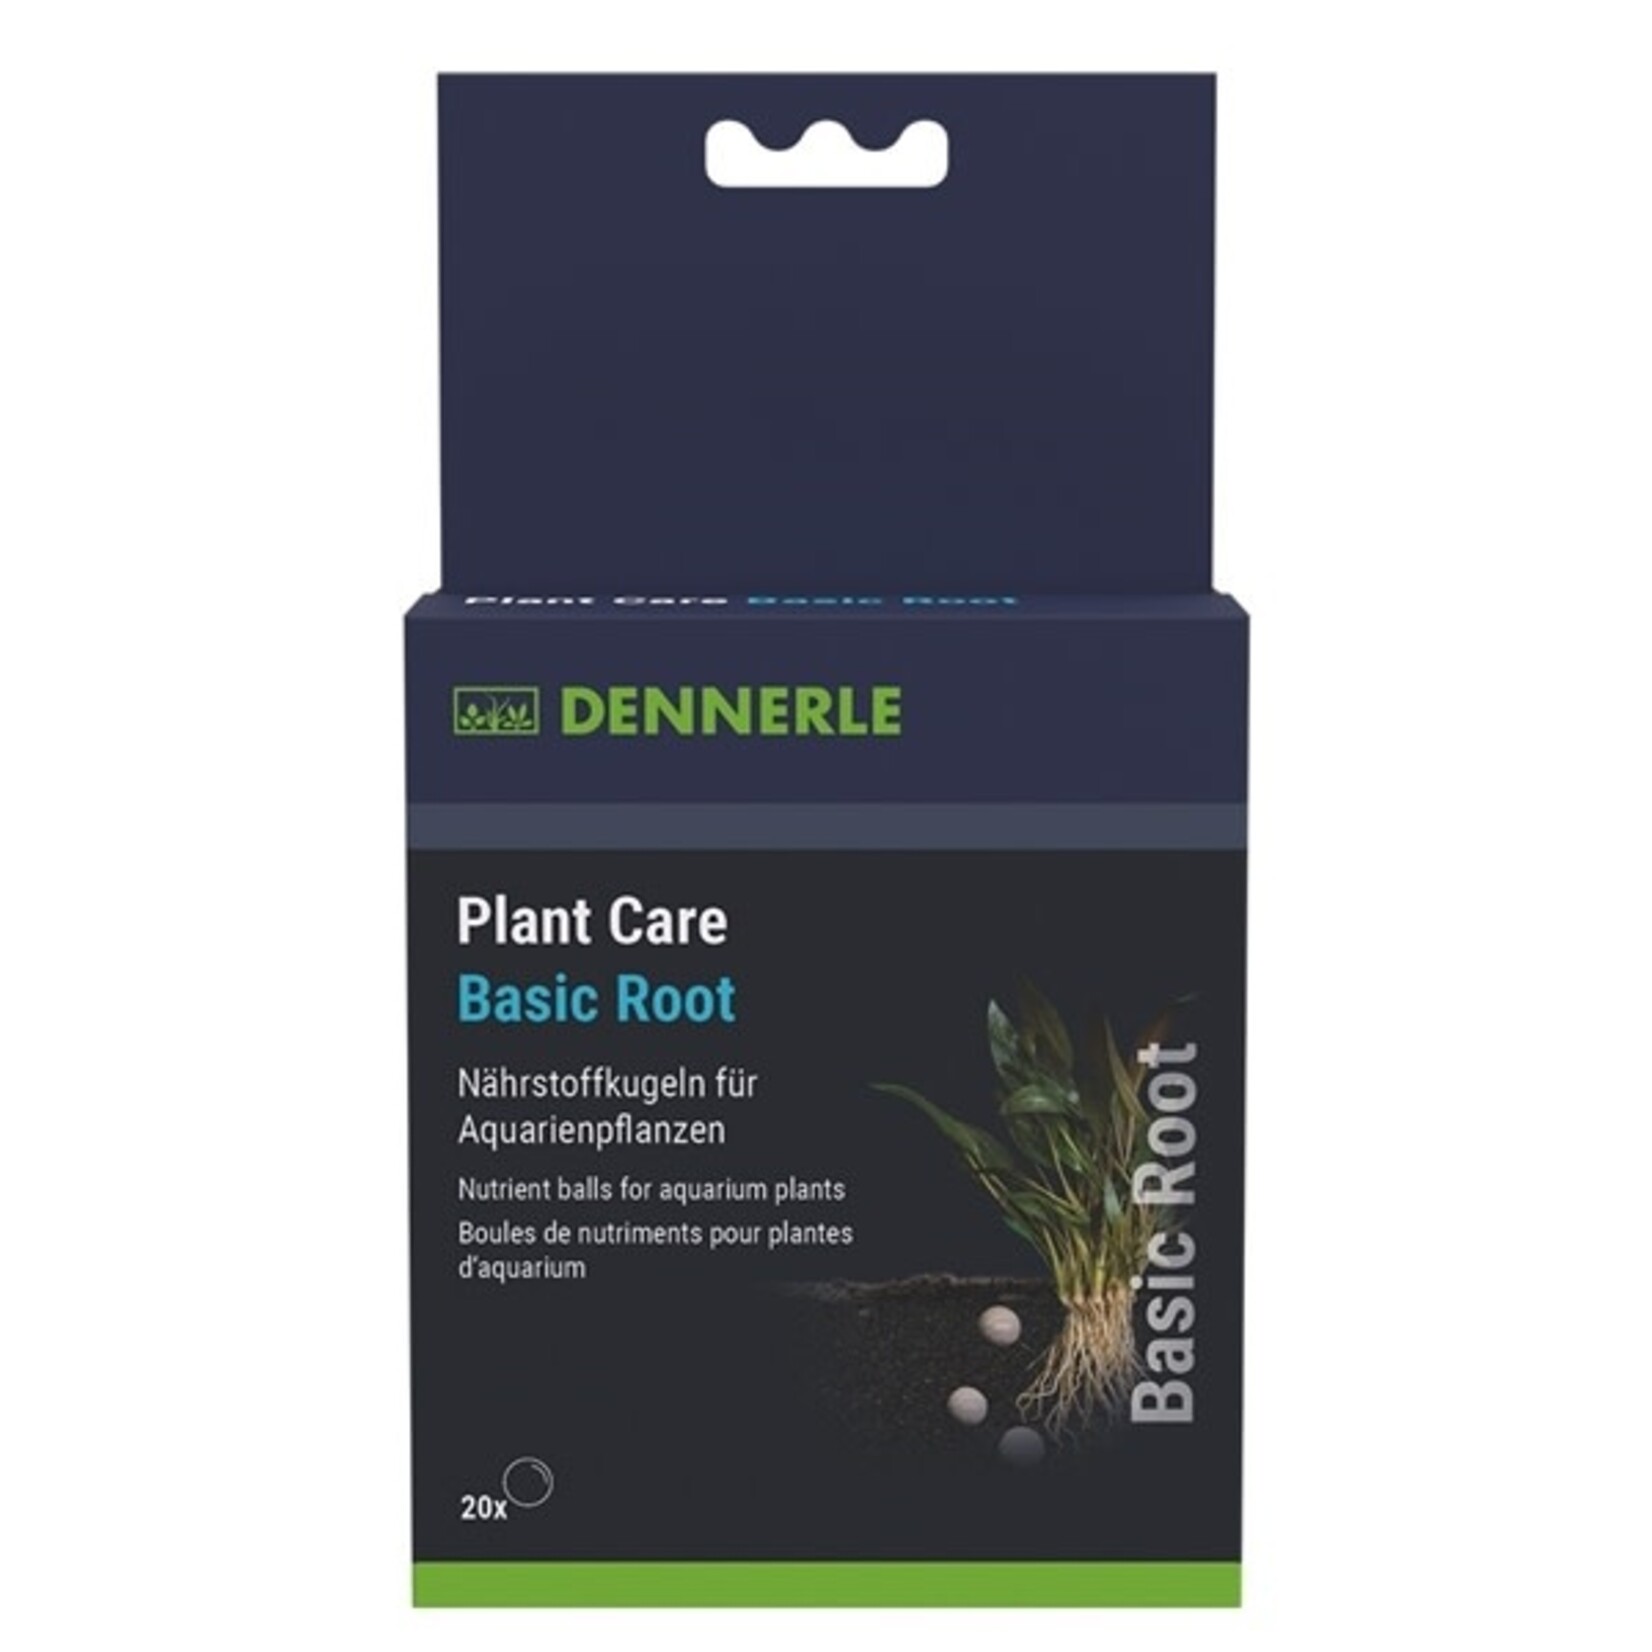 Dennerle DENNERLE PLANT CARE BASIC ROOT 20 ST.